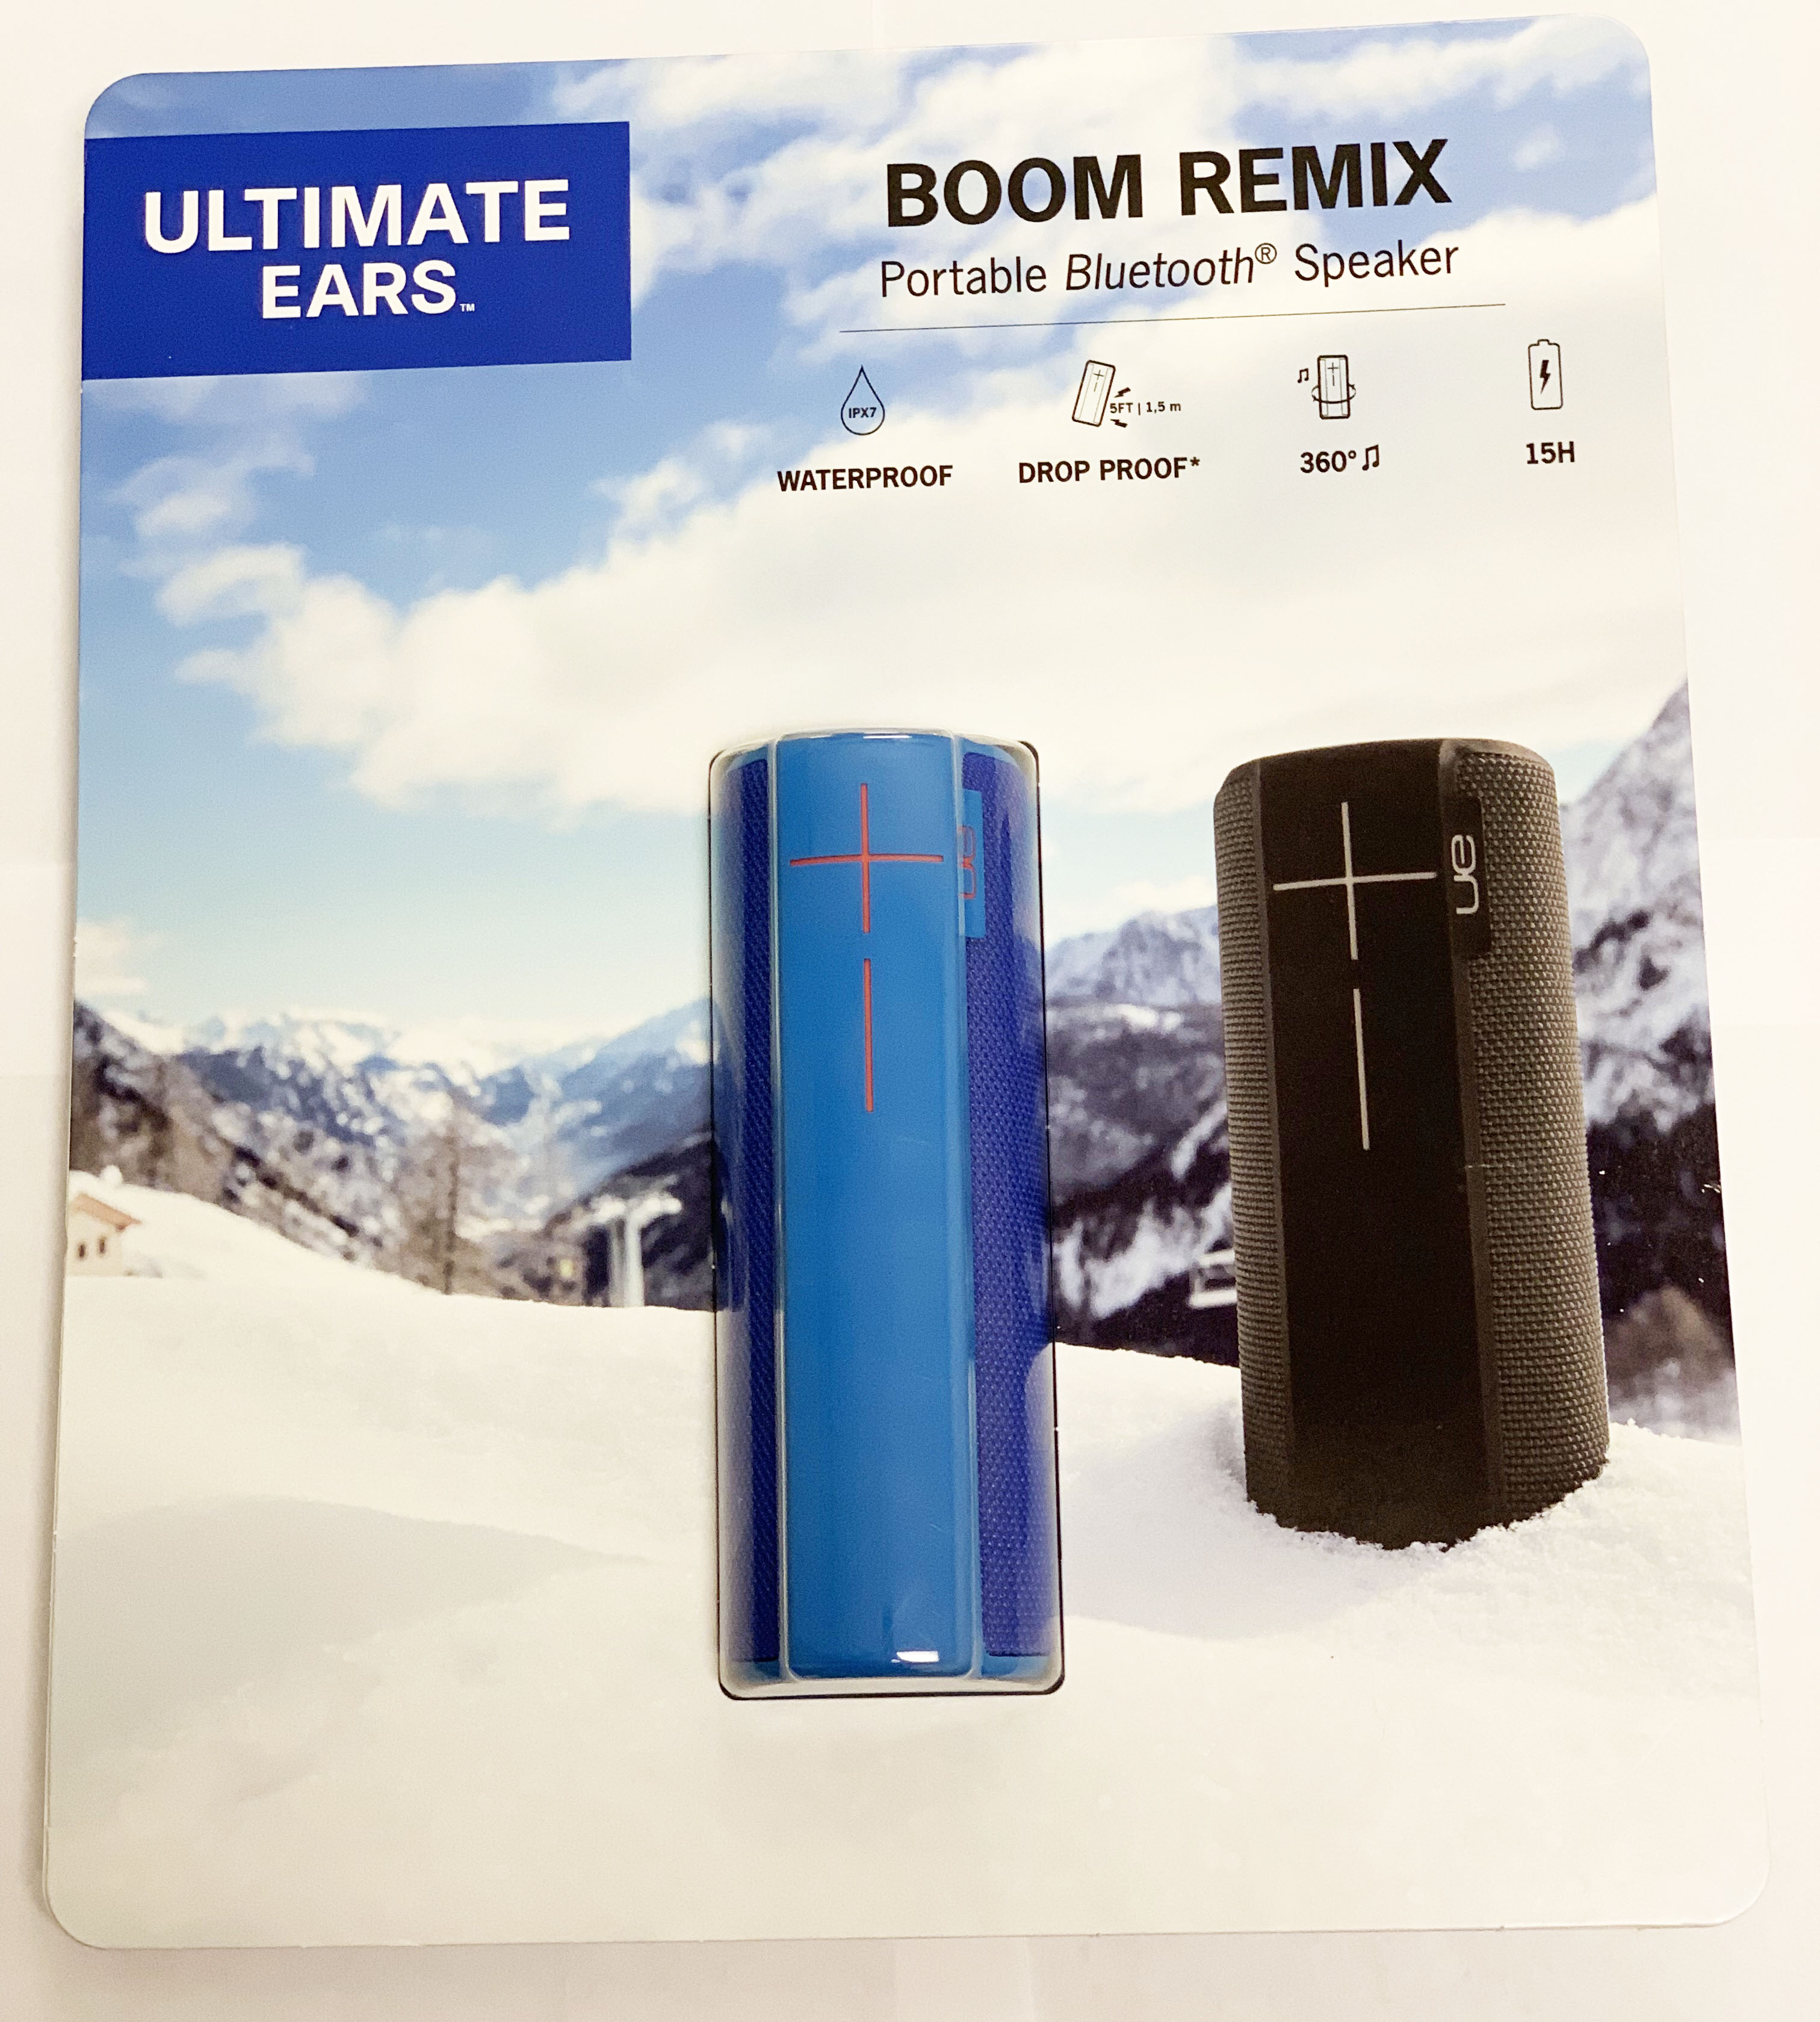 Ultimate Ears Boom Remix Portable 